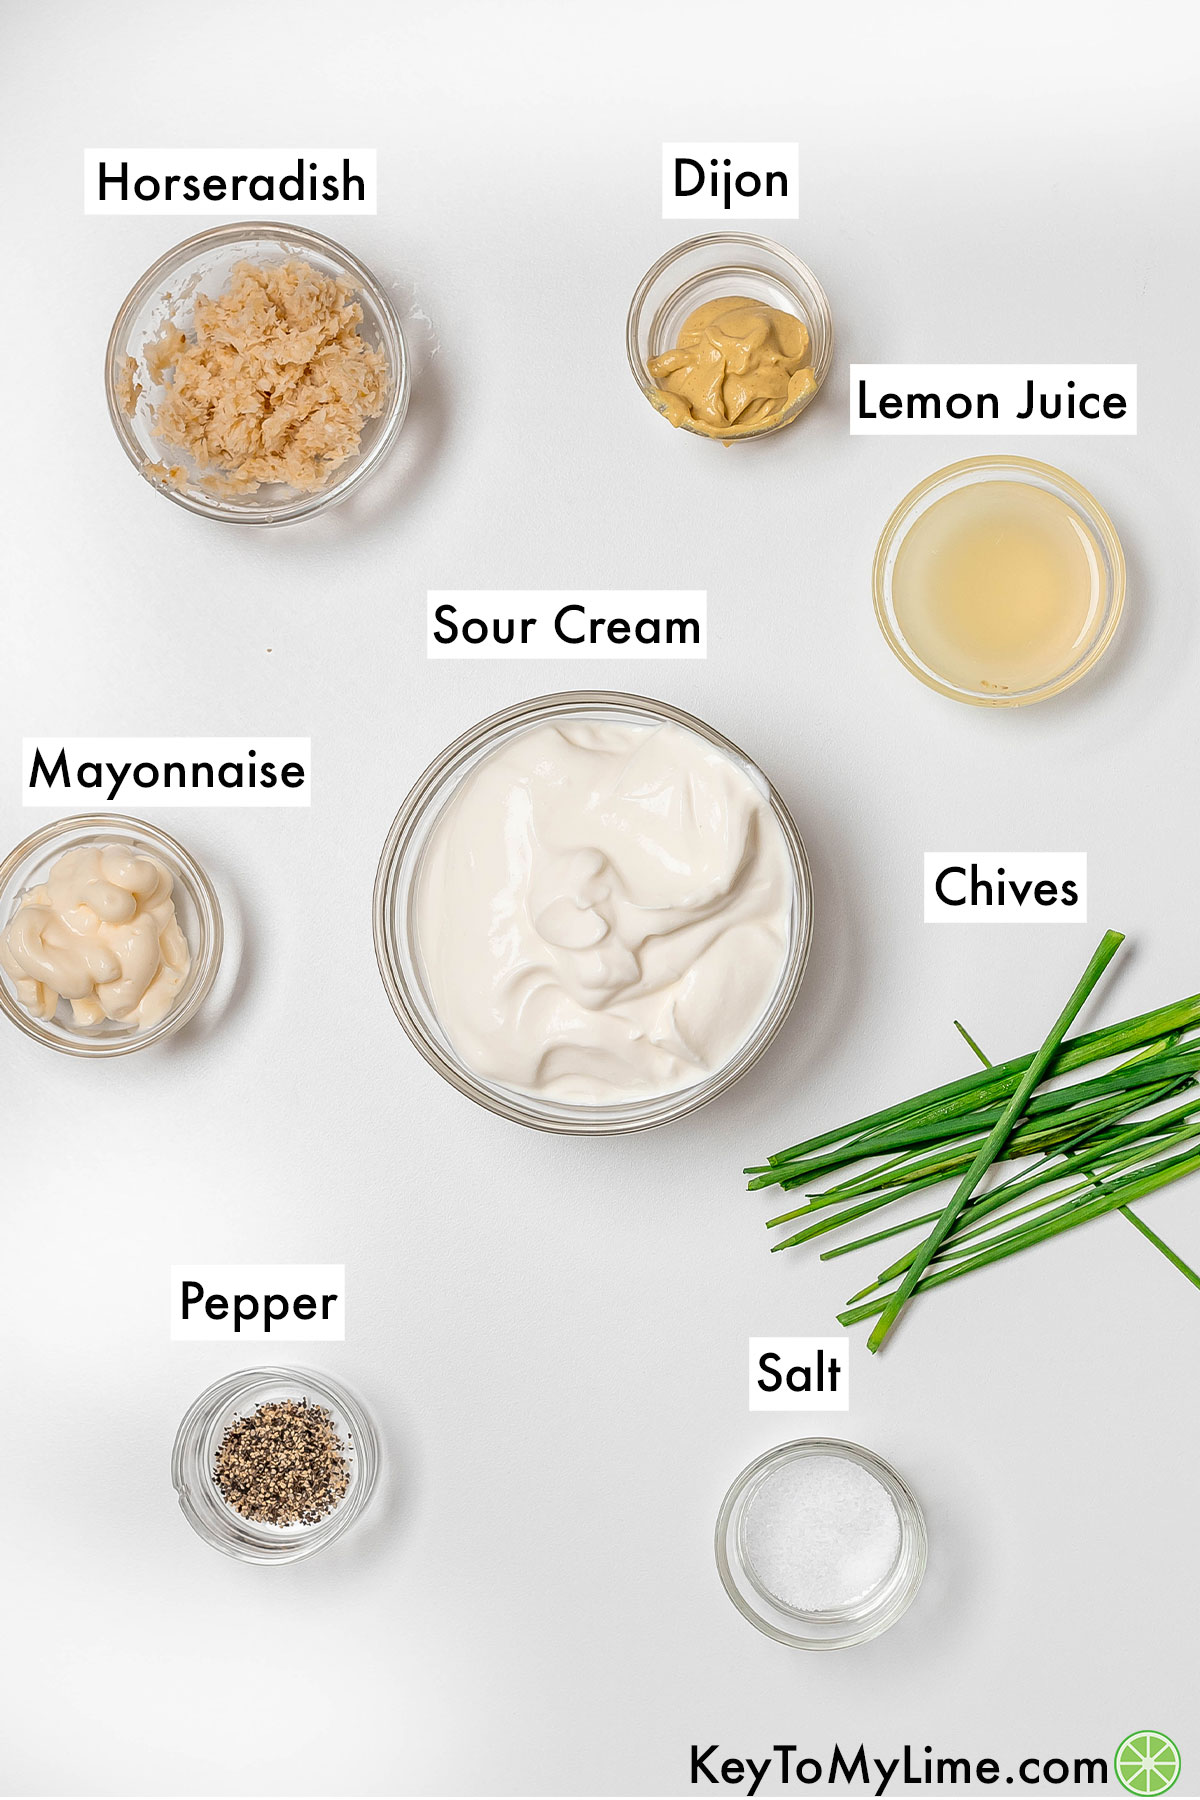 The labeled ingredients for horseradish sauce.